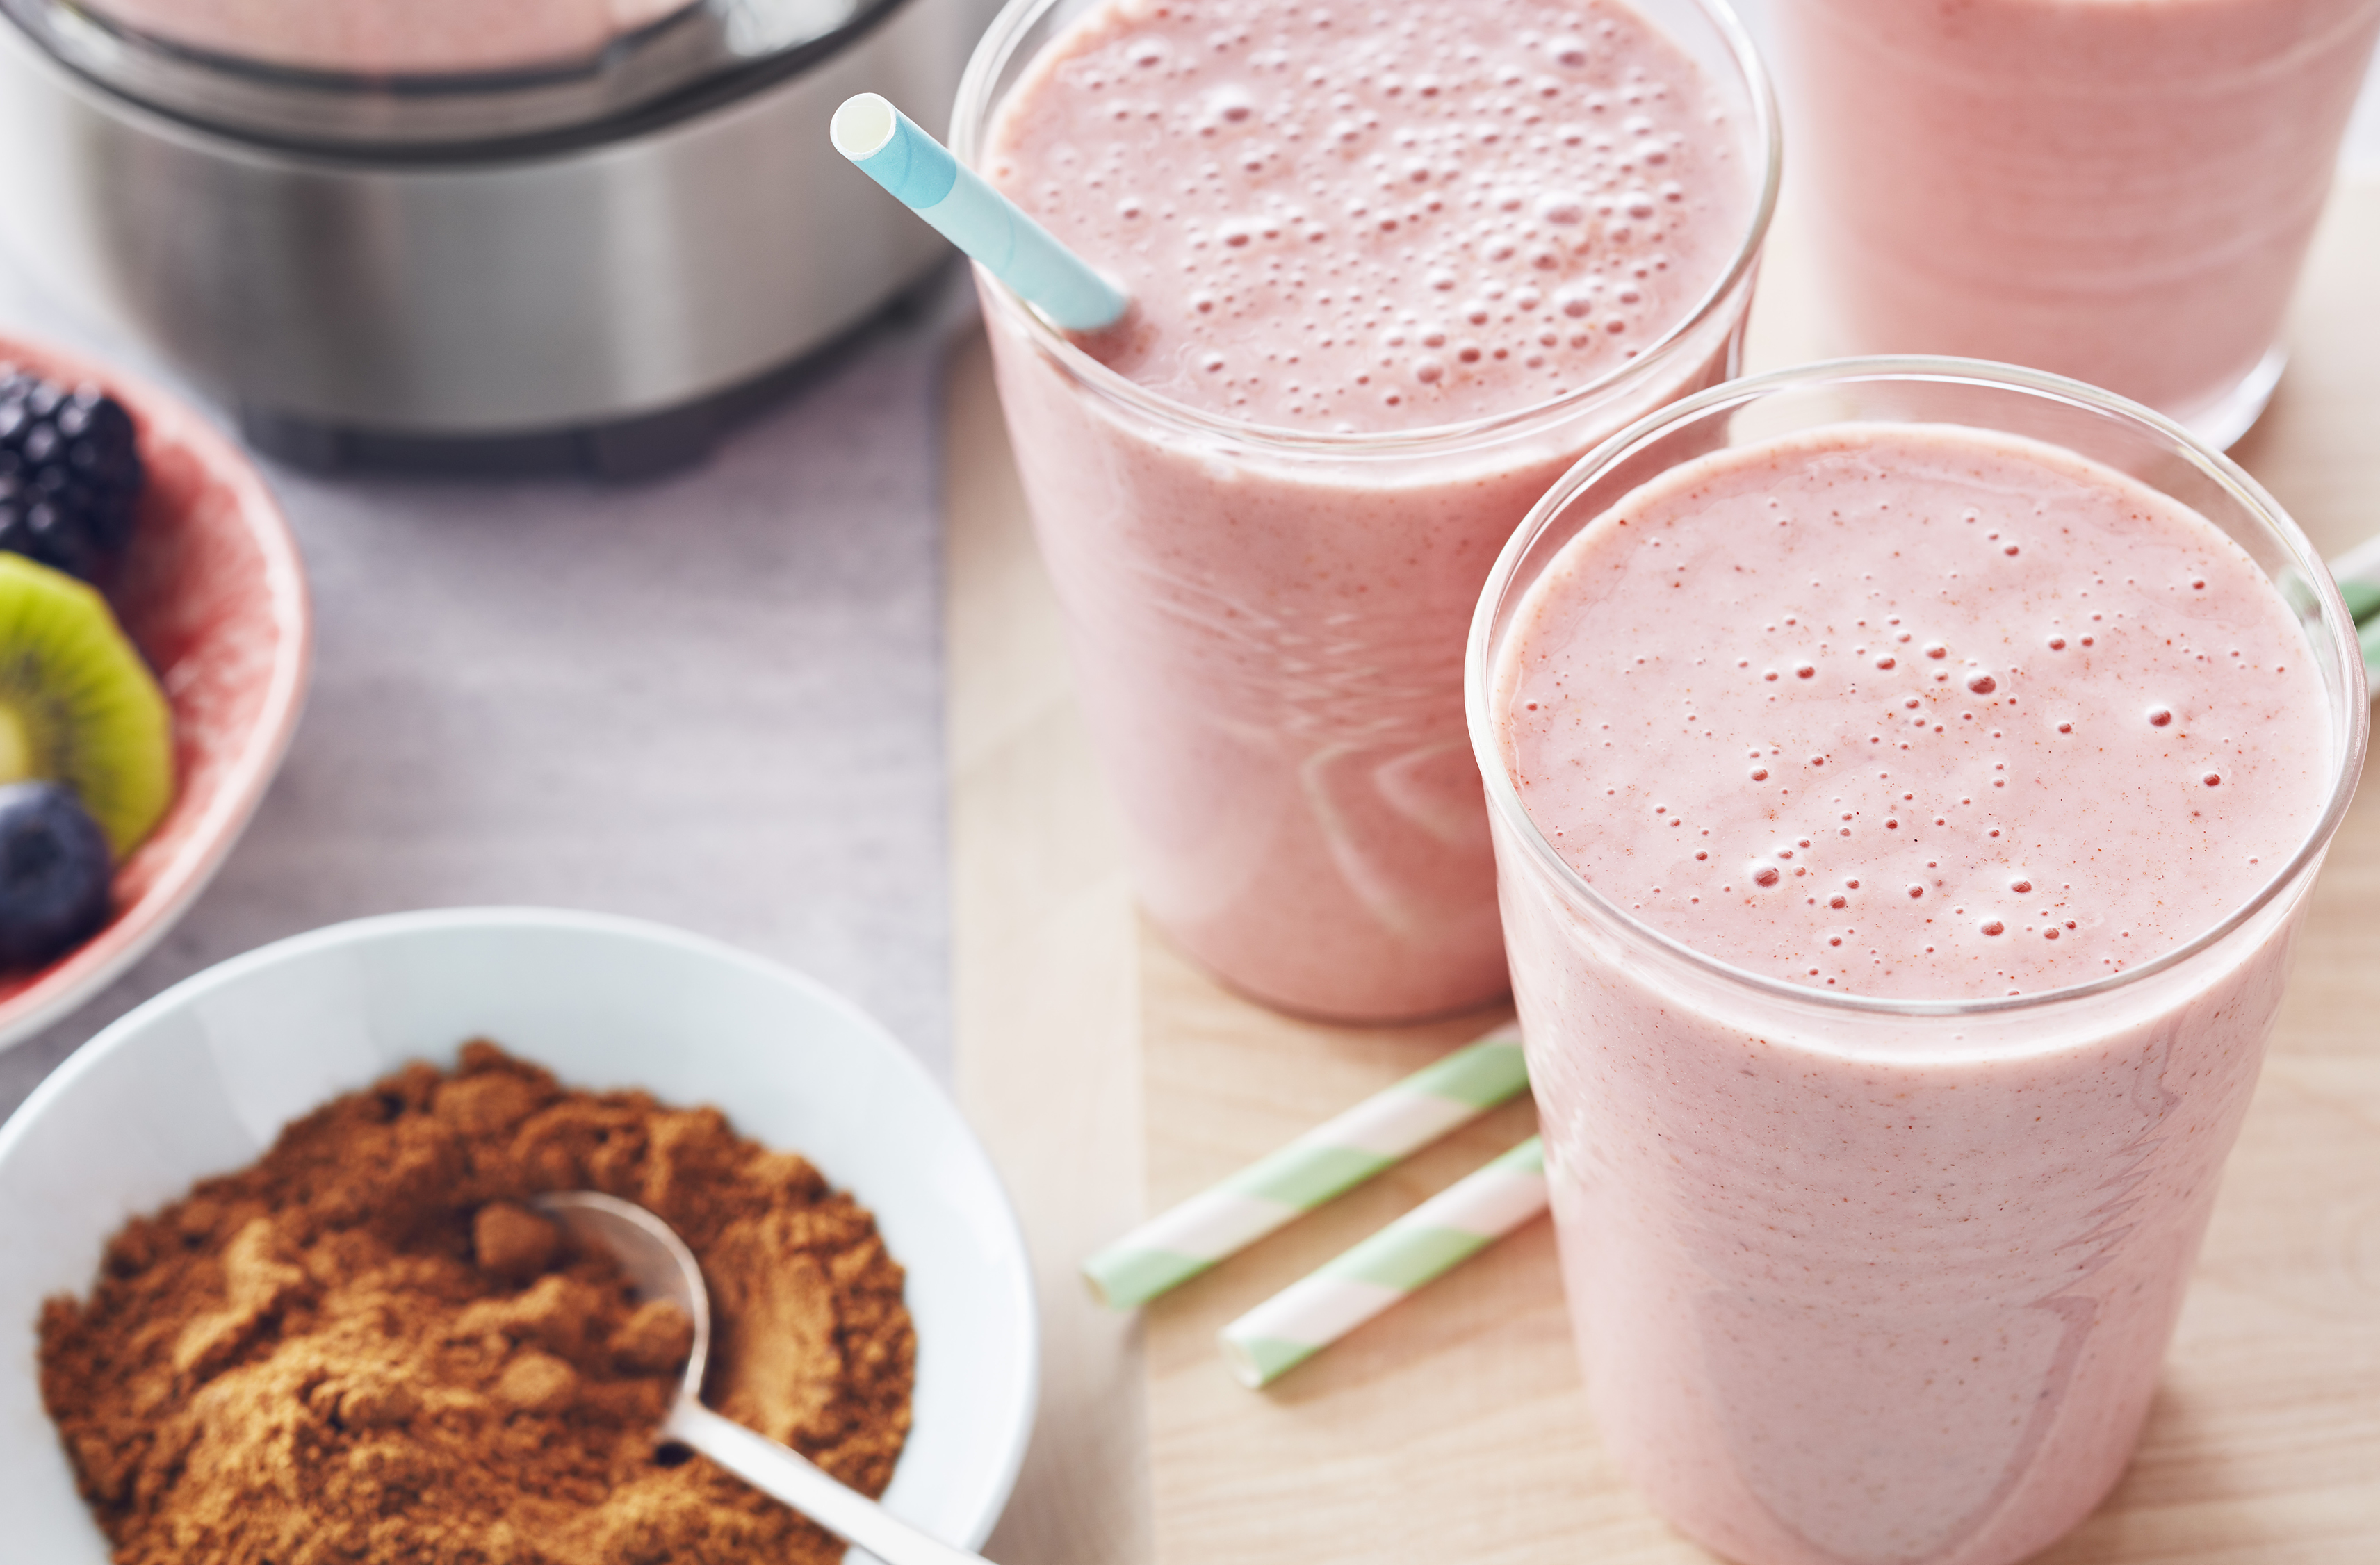 Pink smoothies with straws stand beside fresh fruit and a bowl of spice
